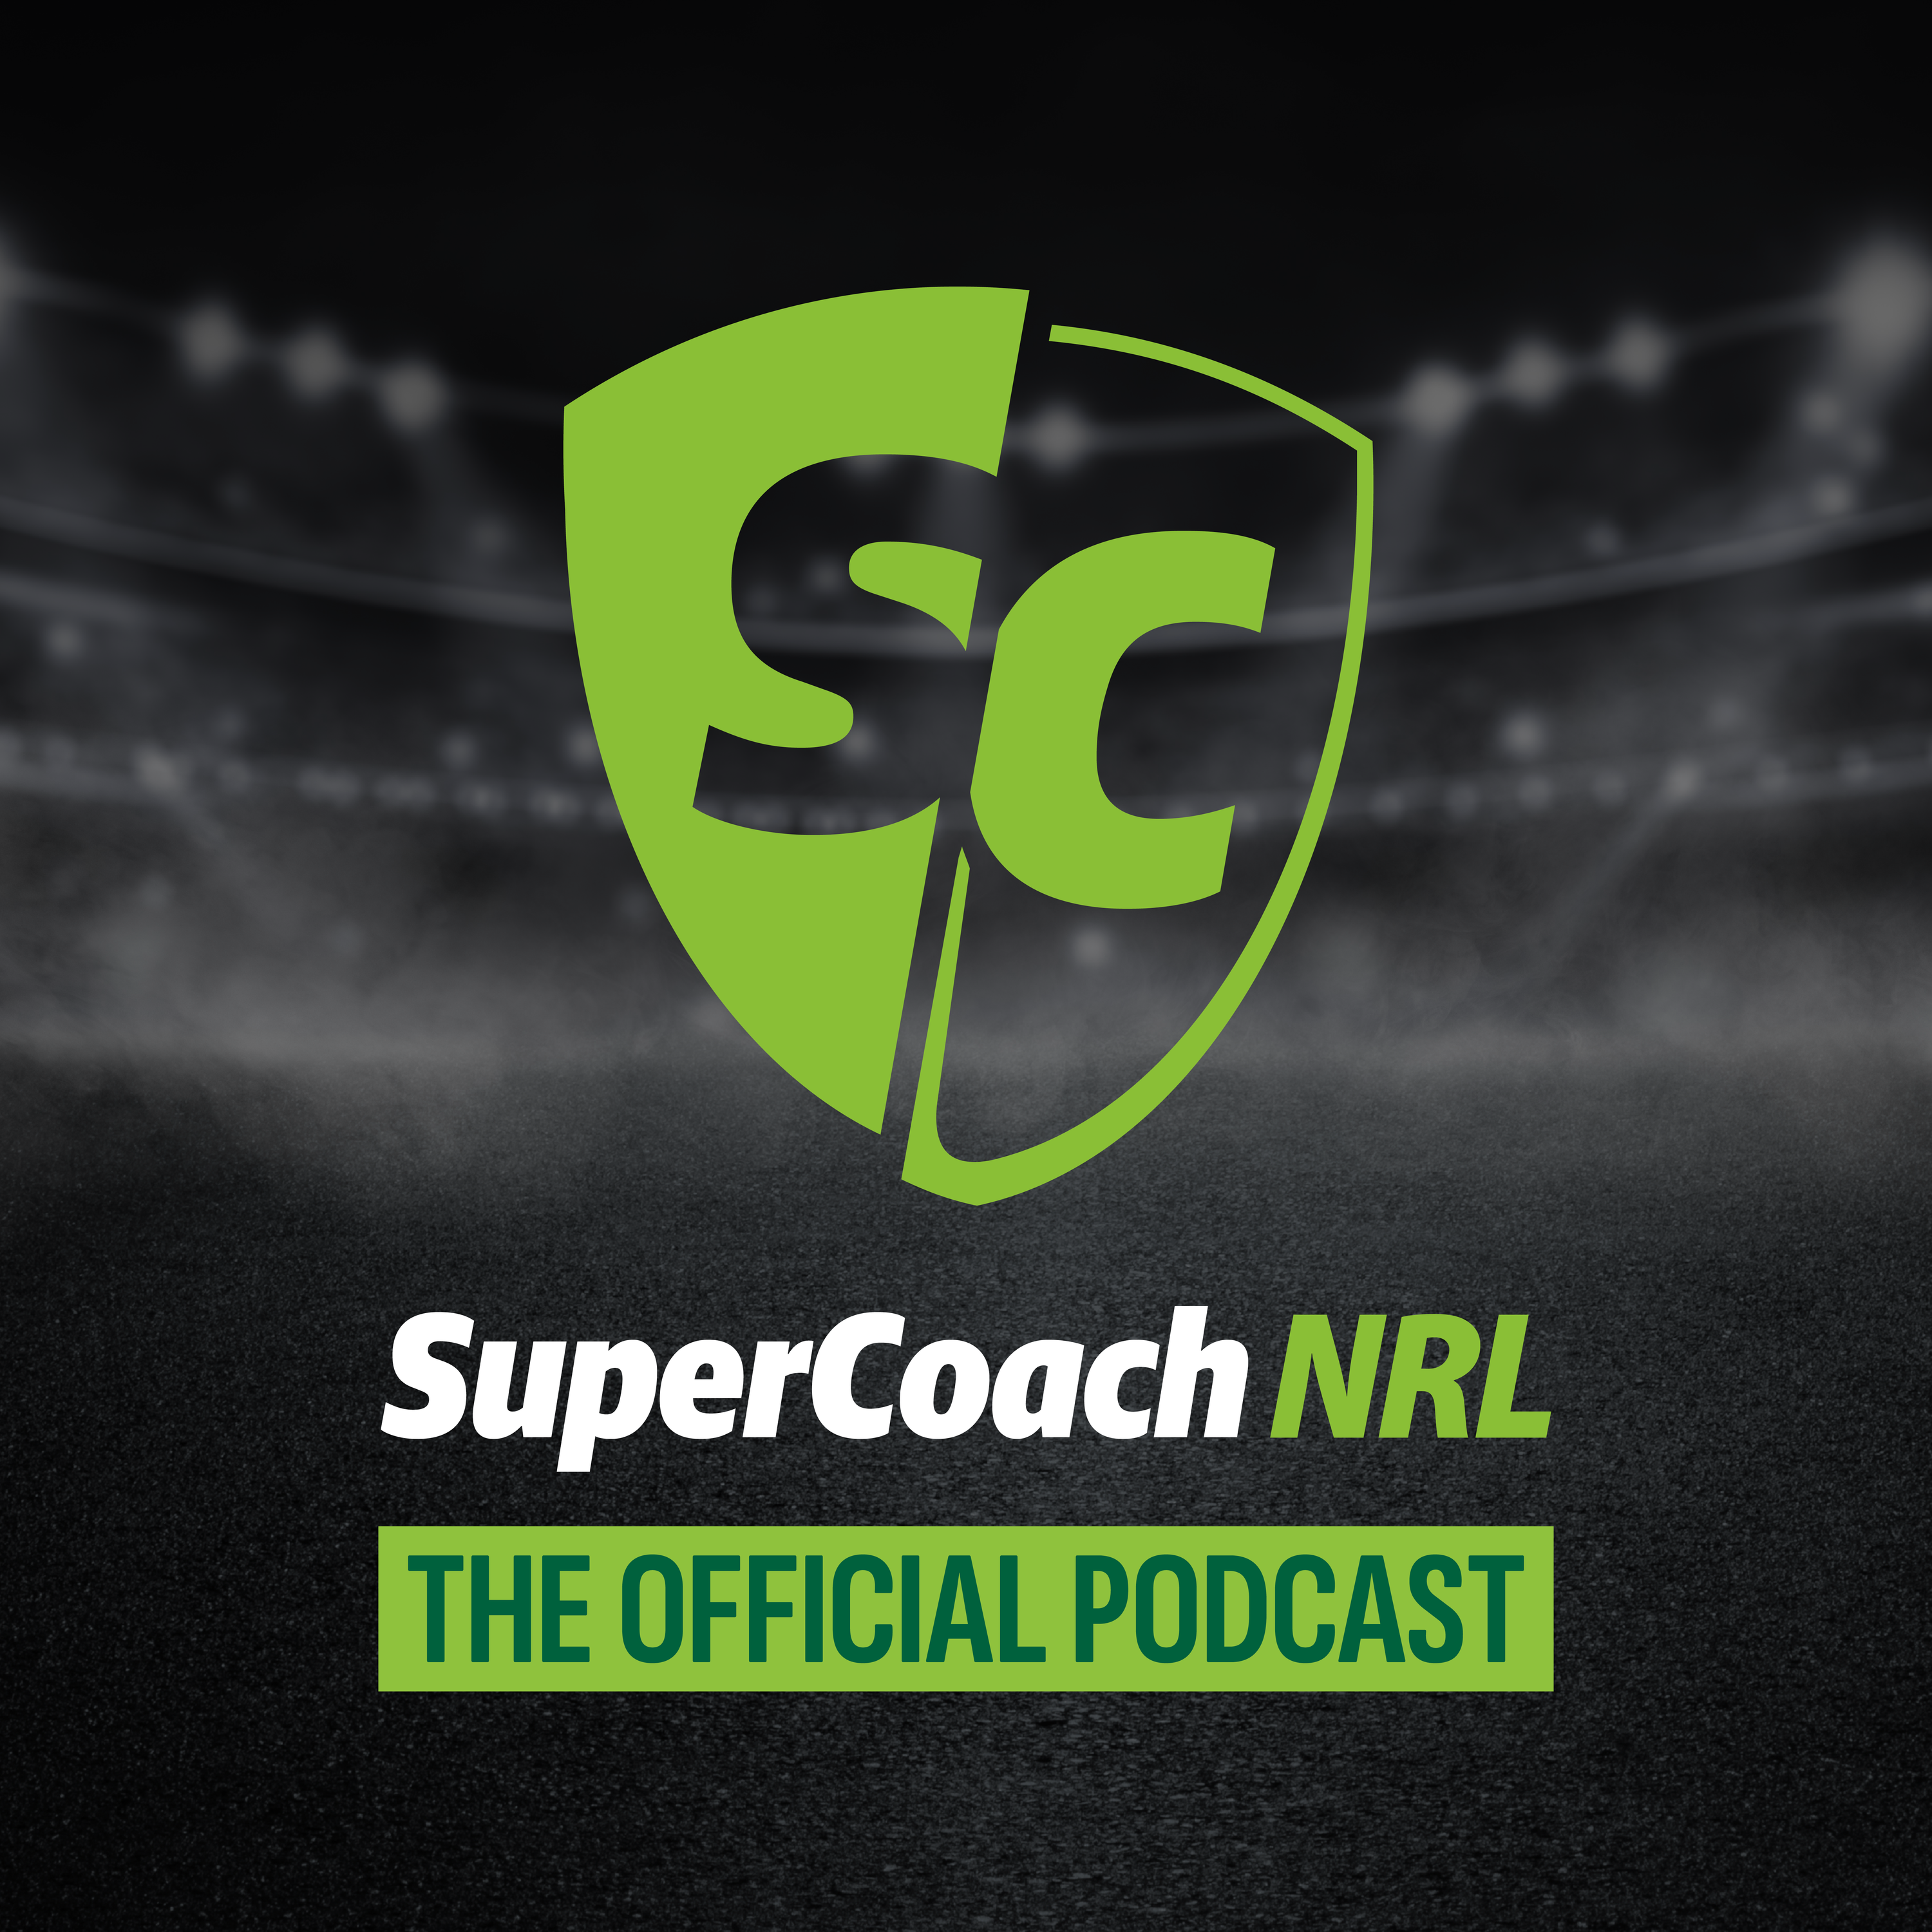 NRL SuperCoach podcast: Round 8 preview